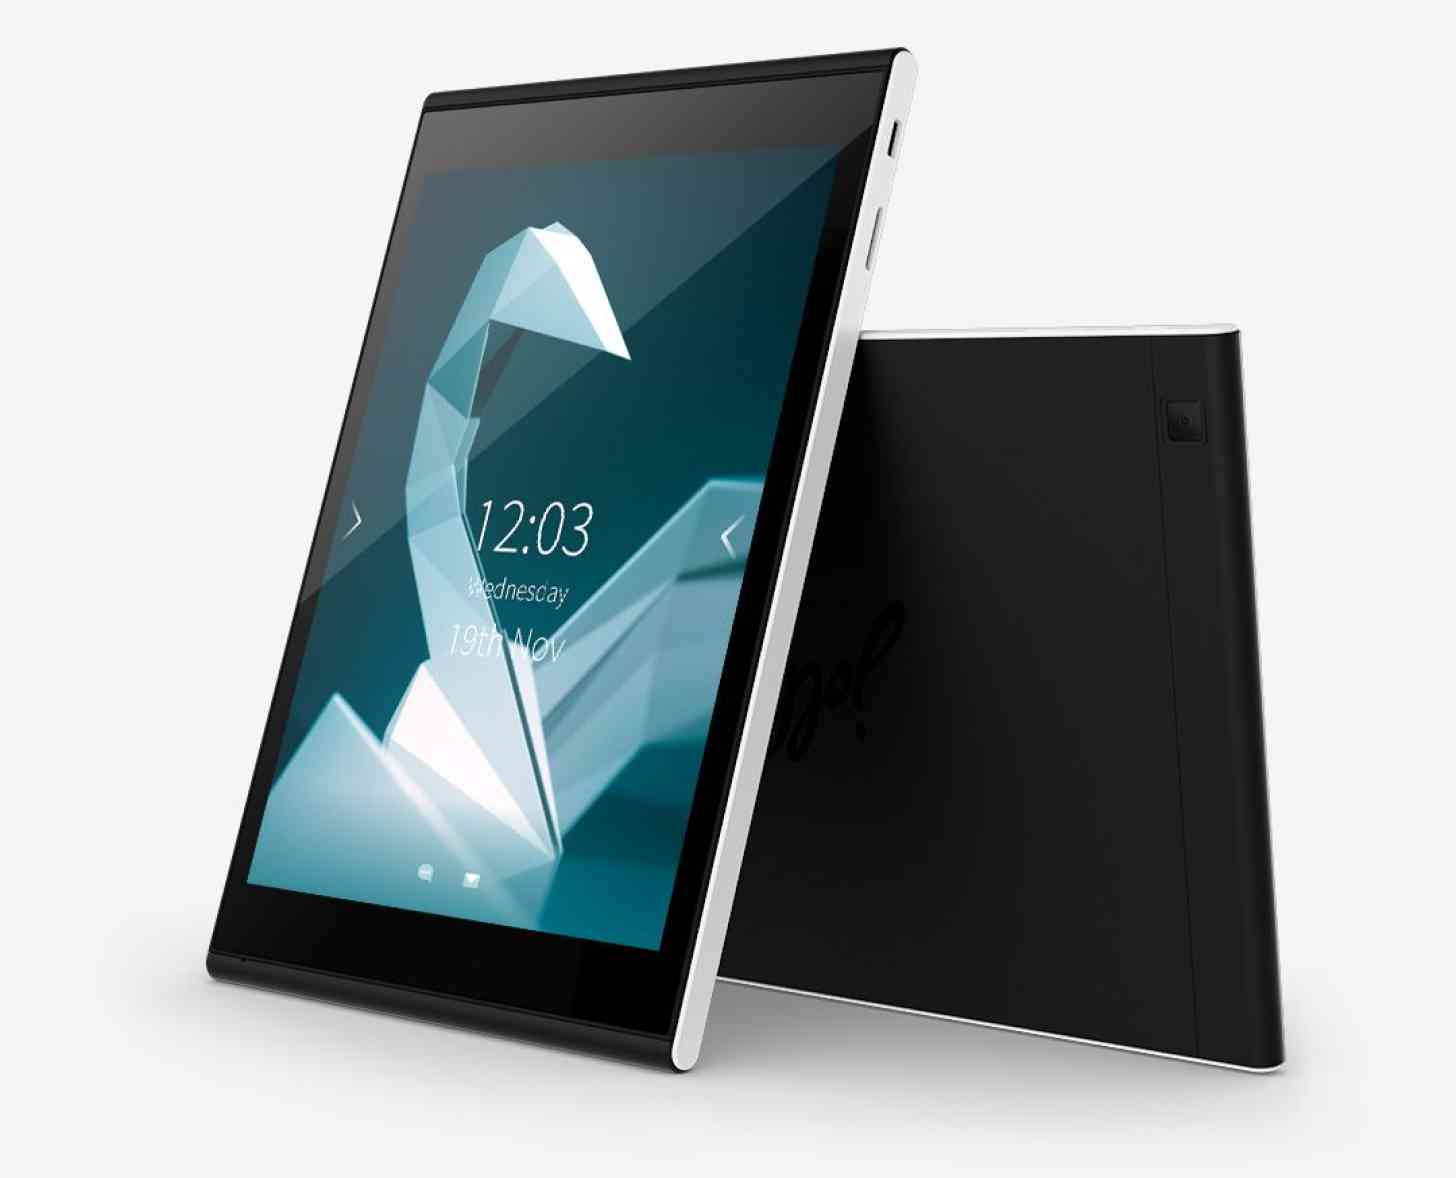 Jolla Tablet front and rear